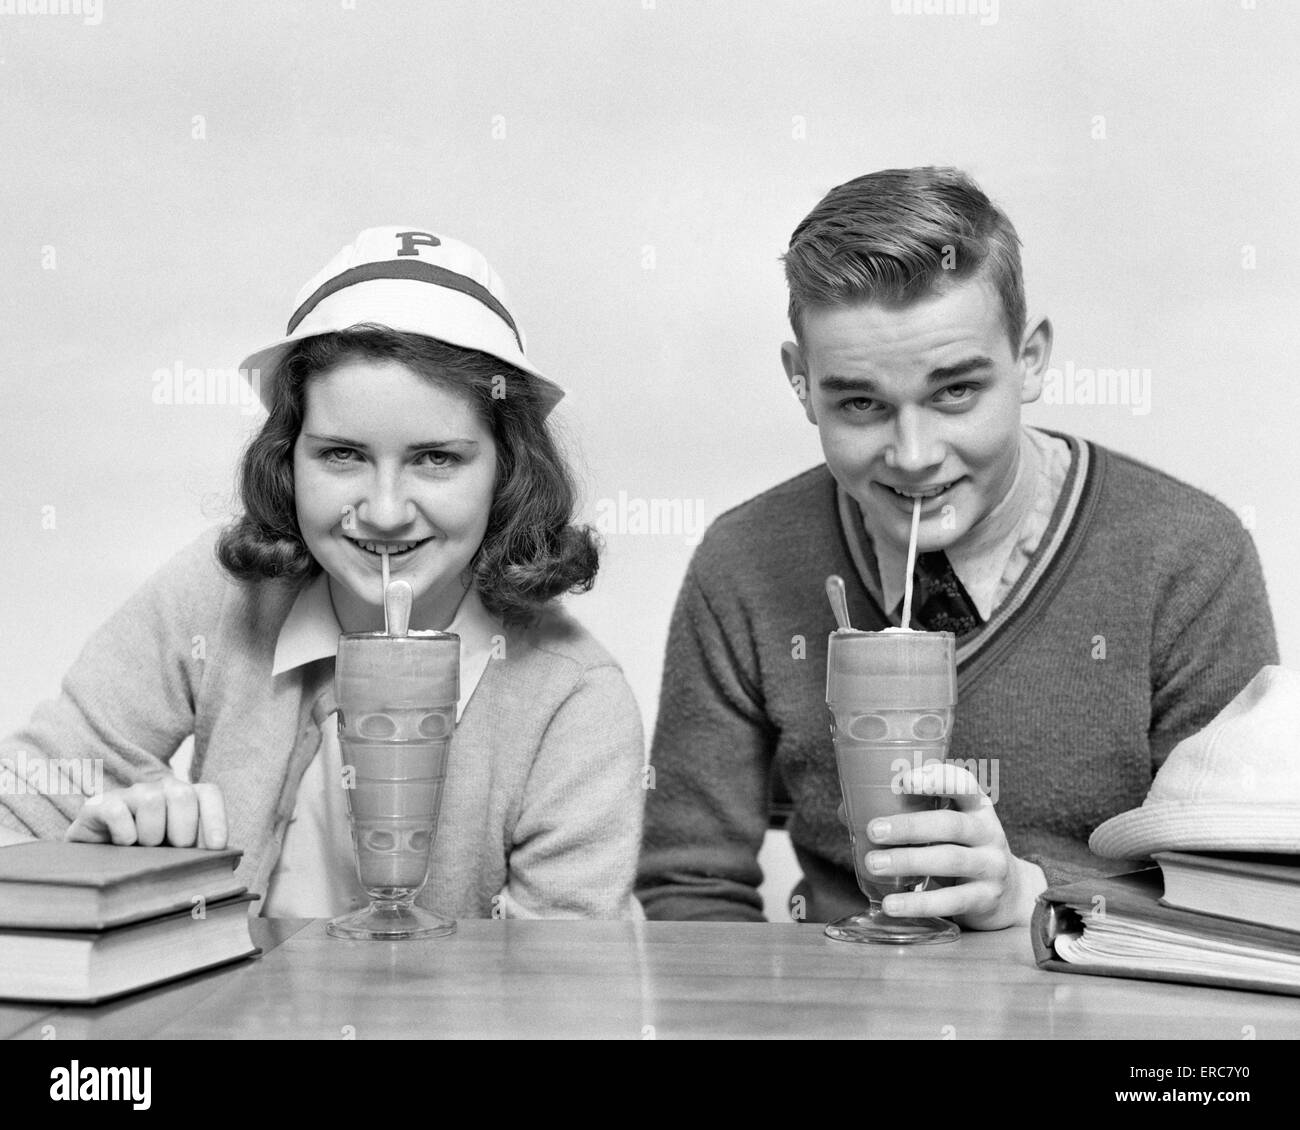 1940s TEENAGE BOY AND GIRL DRINKING MILKSHAKES TOGETHER LOOKING AT CAMERA Stock Photo